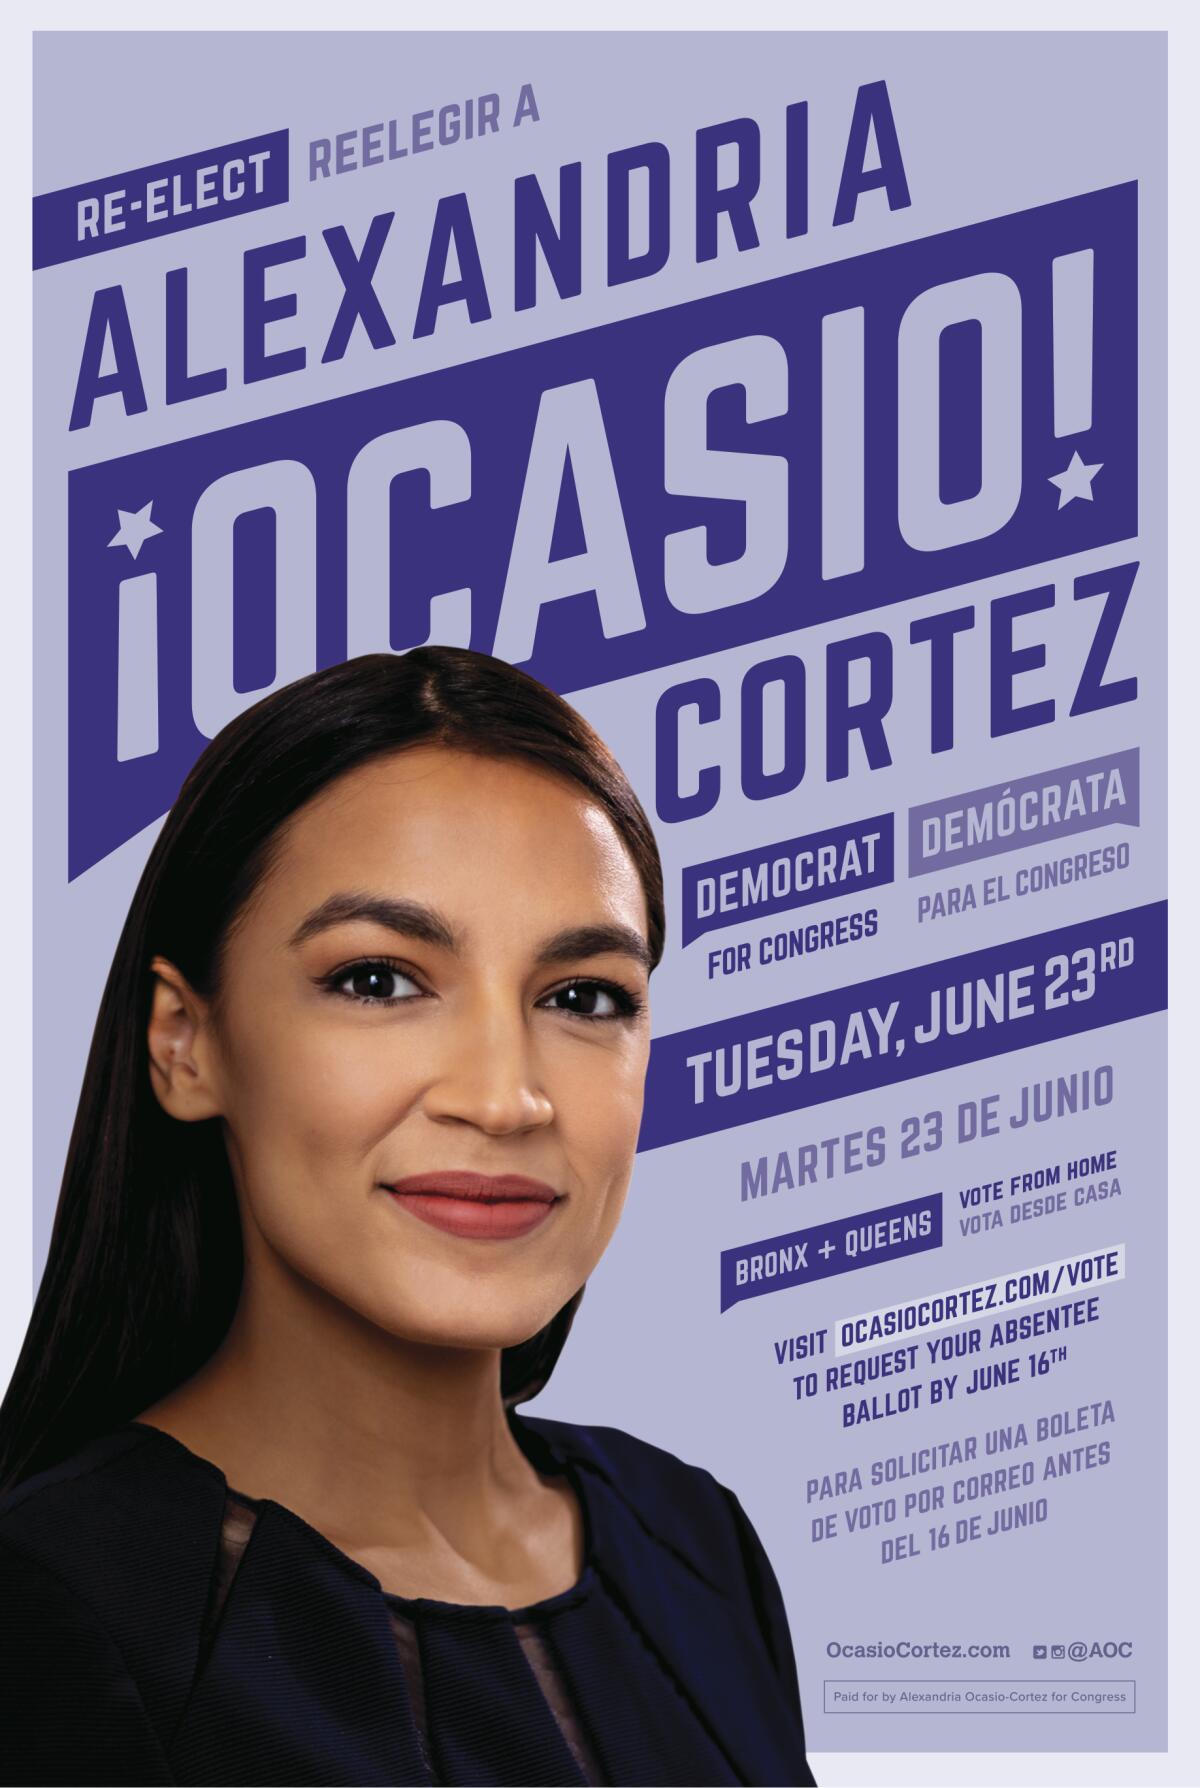 A Rep. Alexandria Ocasio-Cortez campaign poster, using angled type and graphics.